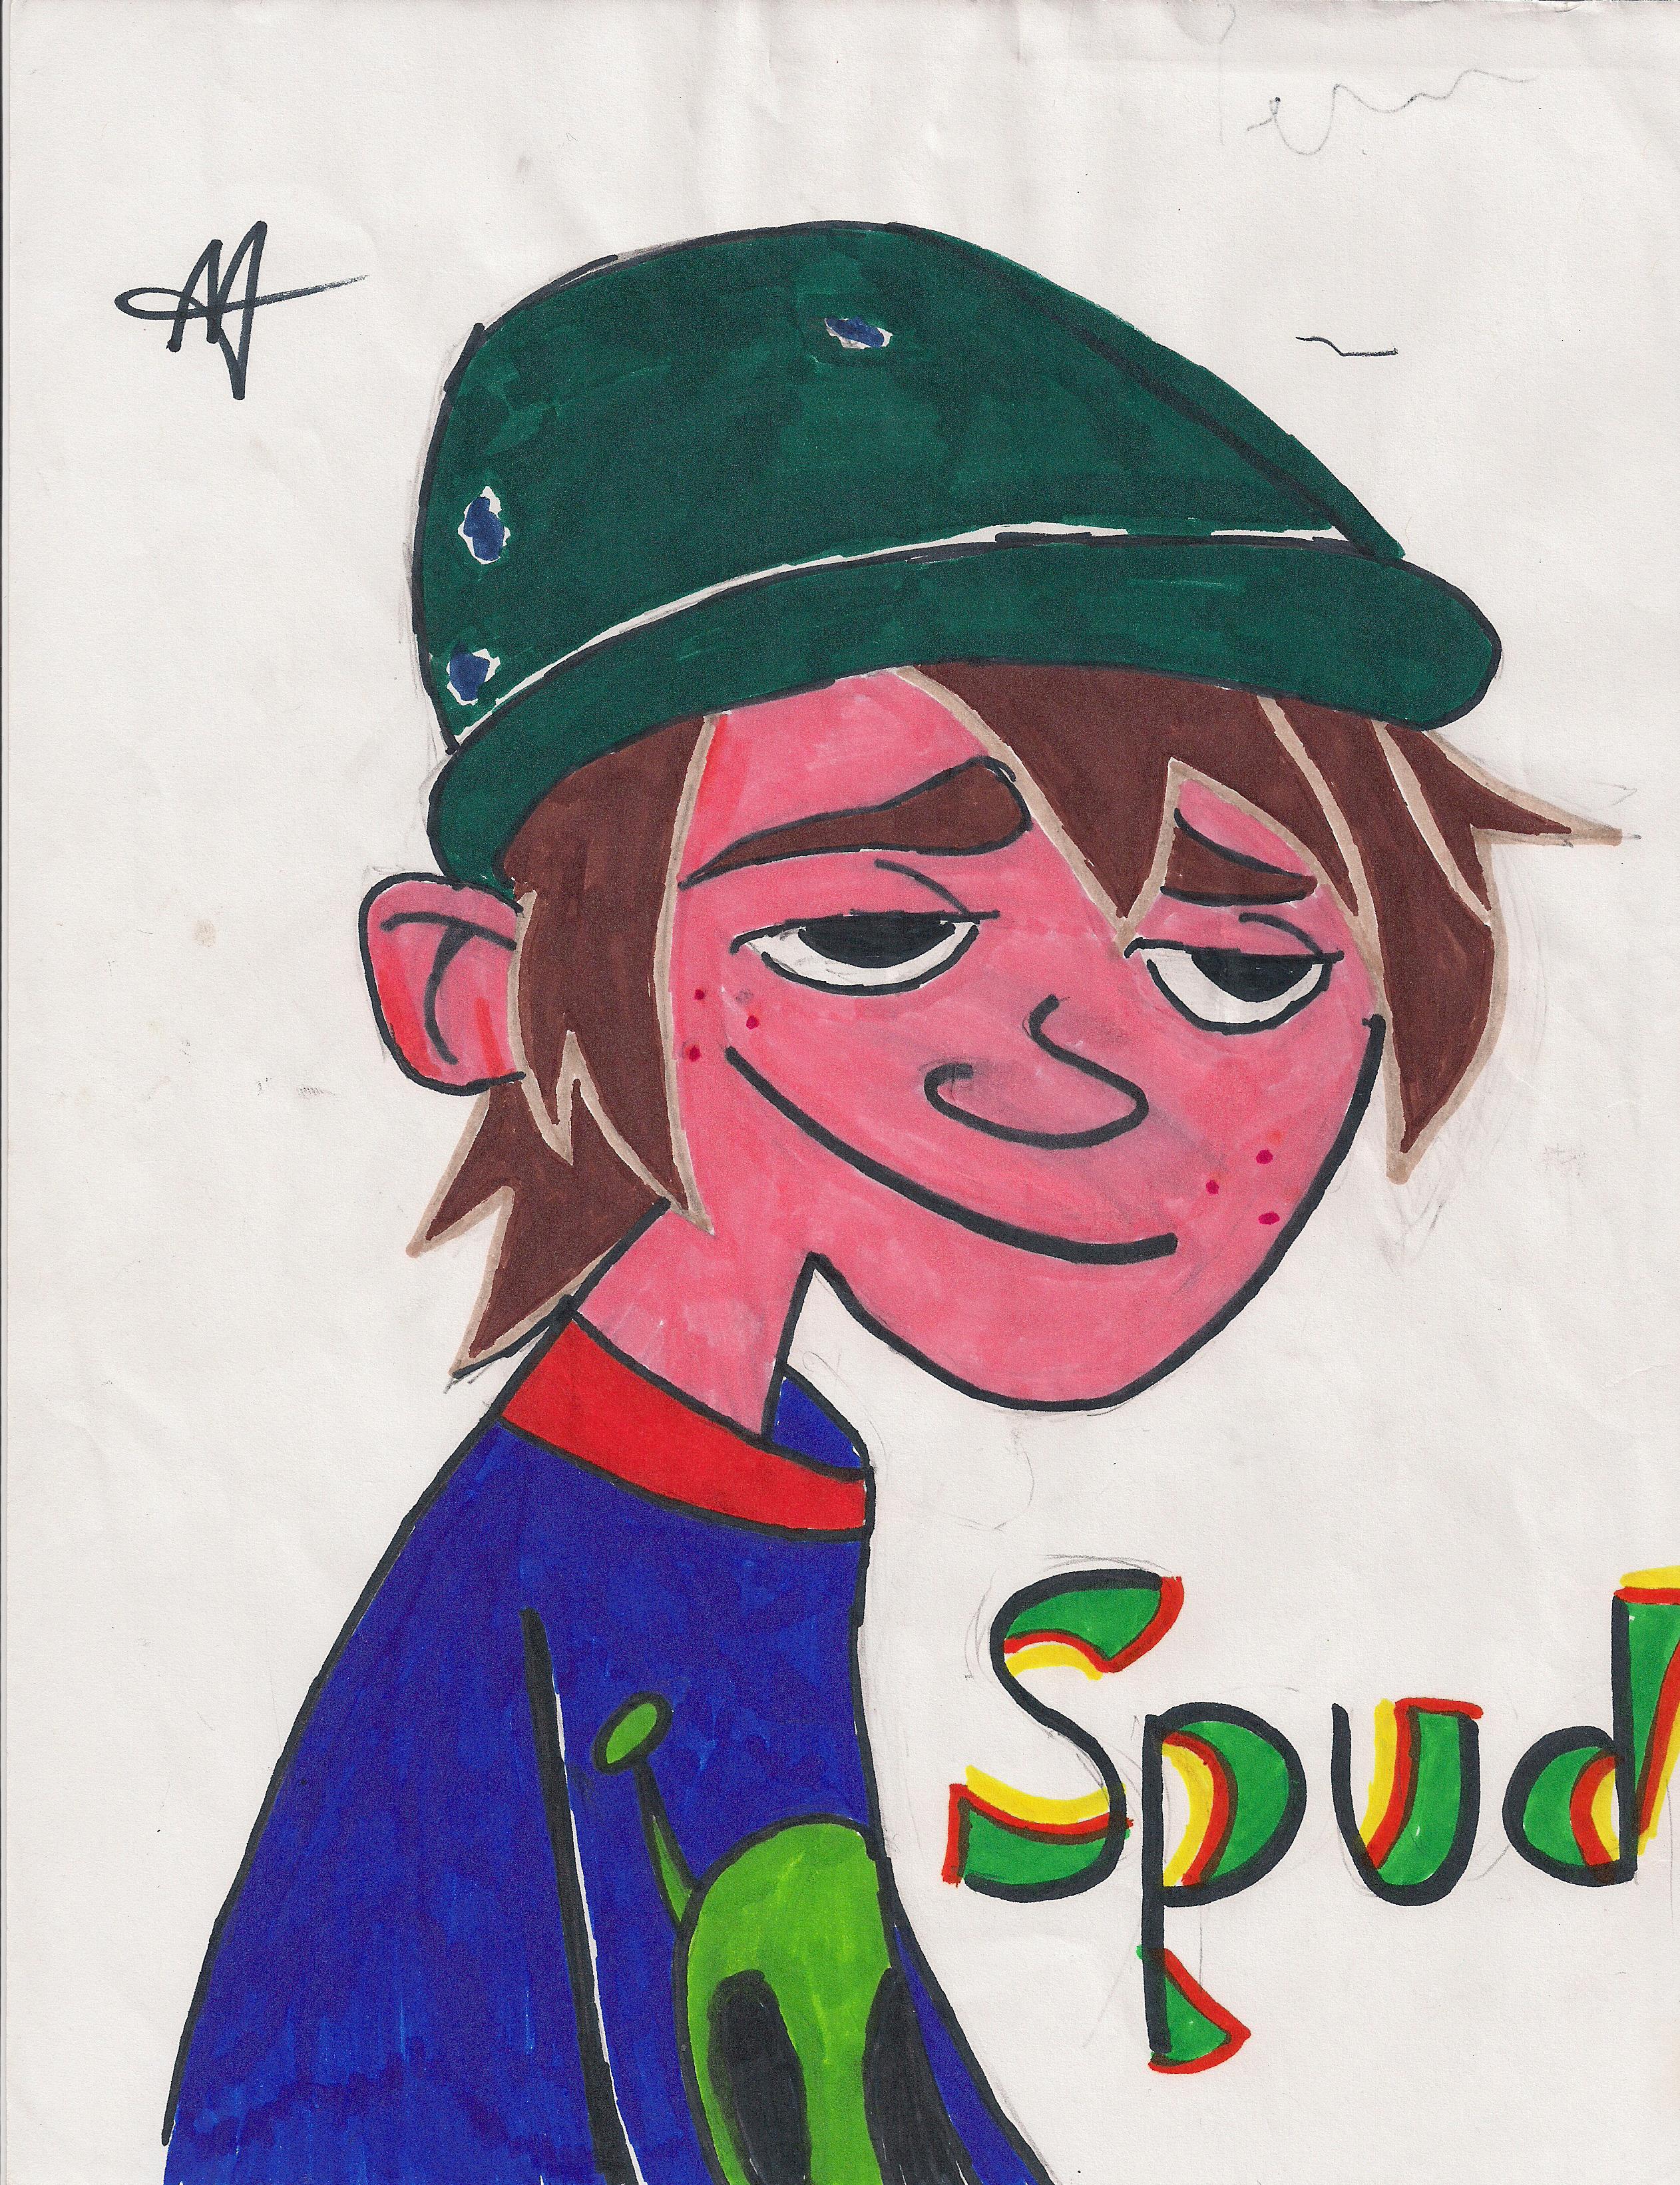 Spud!!! by marisk8r